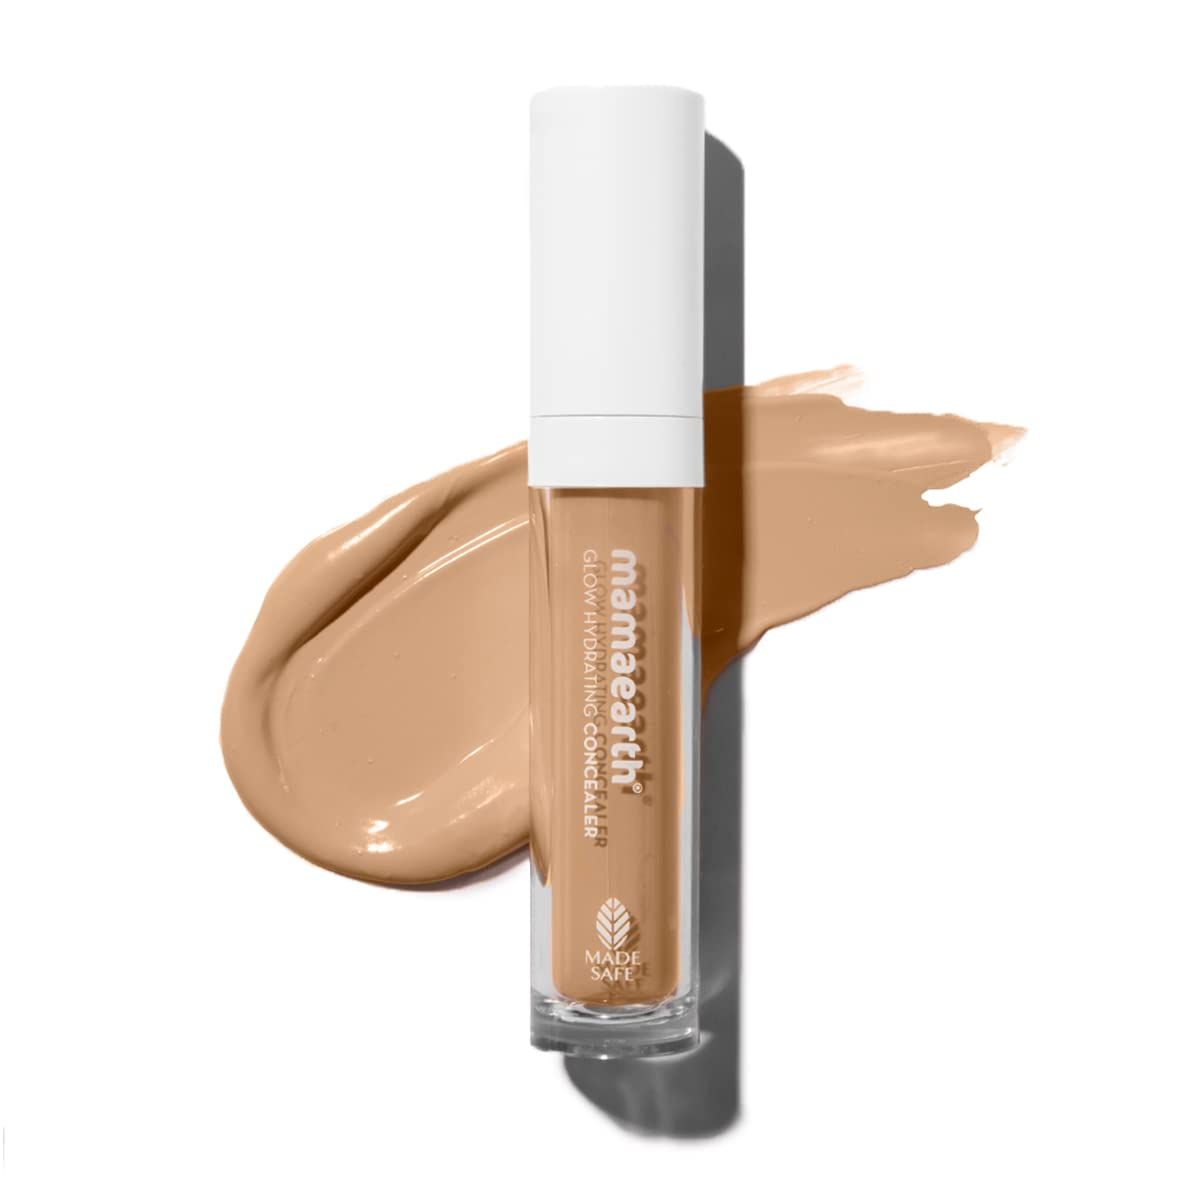 Mamaearth Glow Hydrating Concealer Ivory Glow - 6 ml